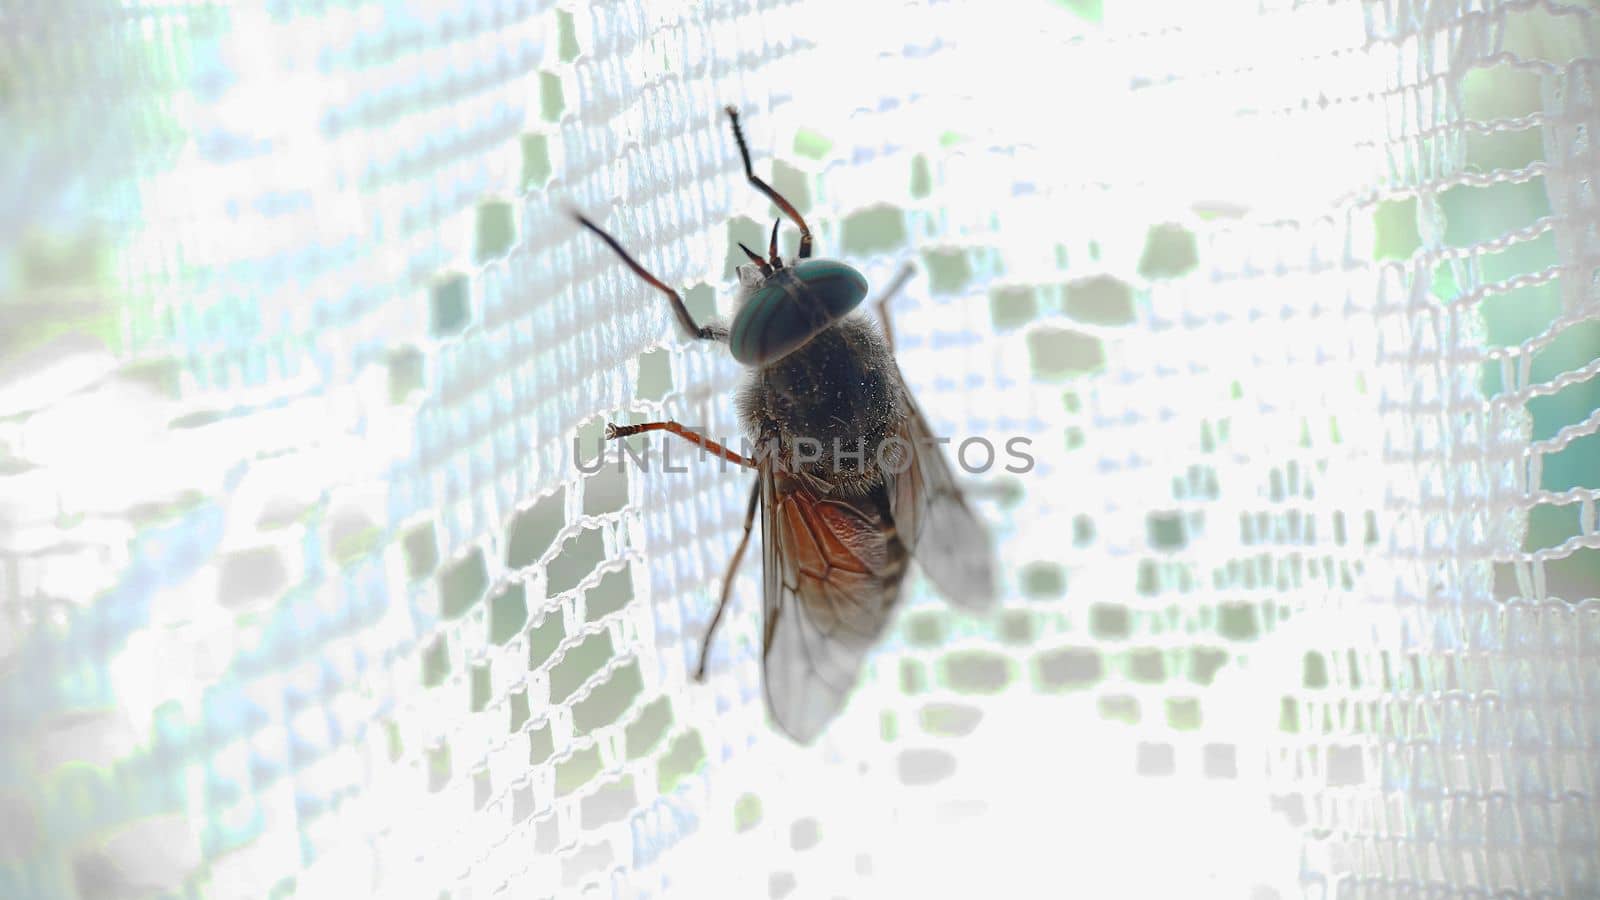 Macrophotography. Green-eyed insect gadfly close-up on lace white curtains.Texture or background.Selective focus.